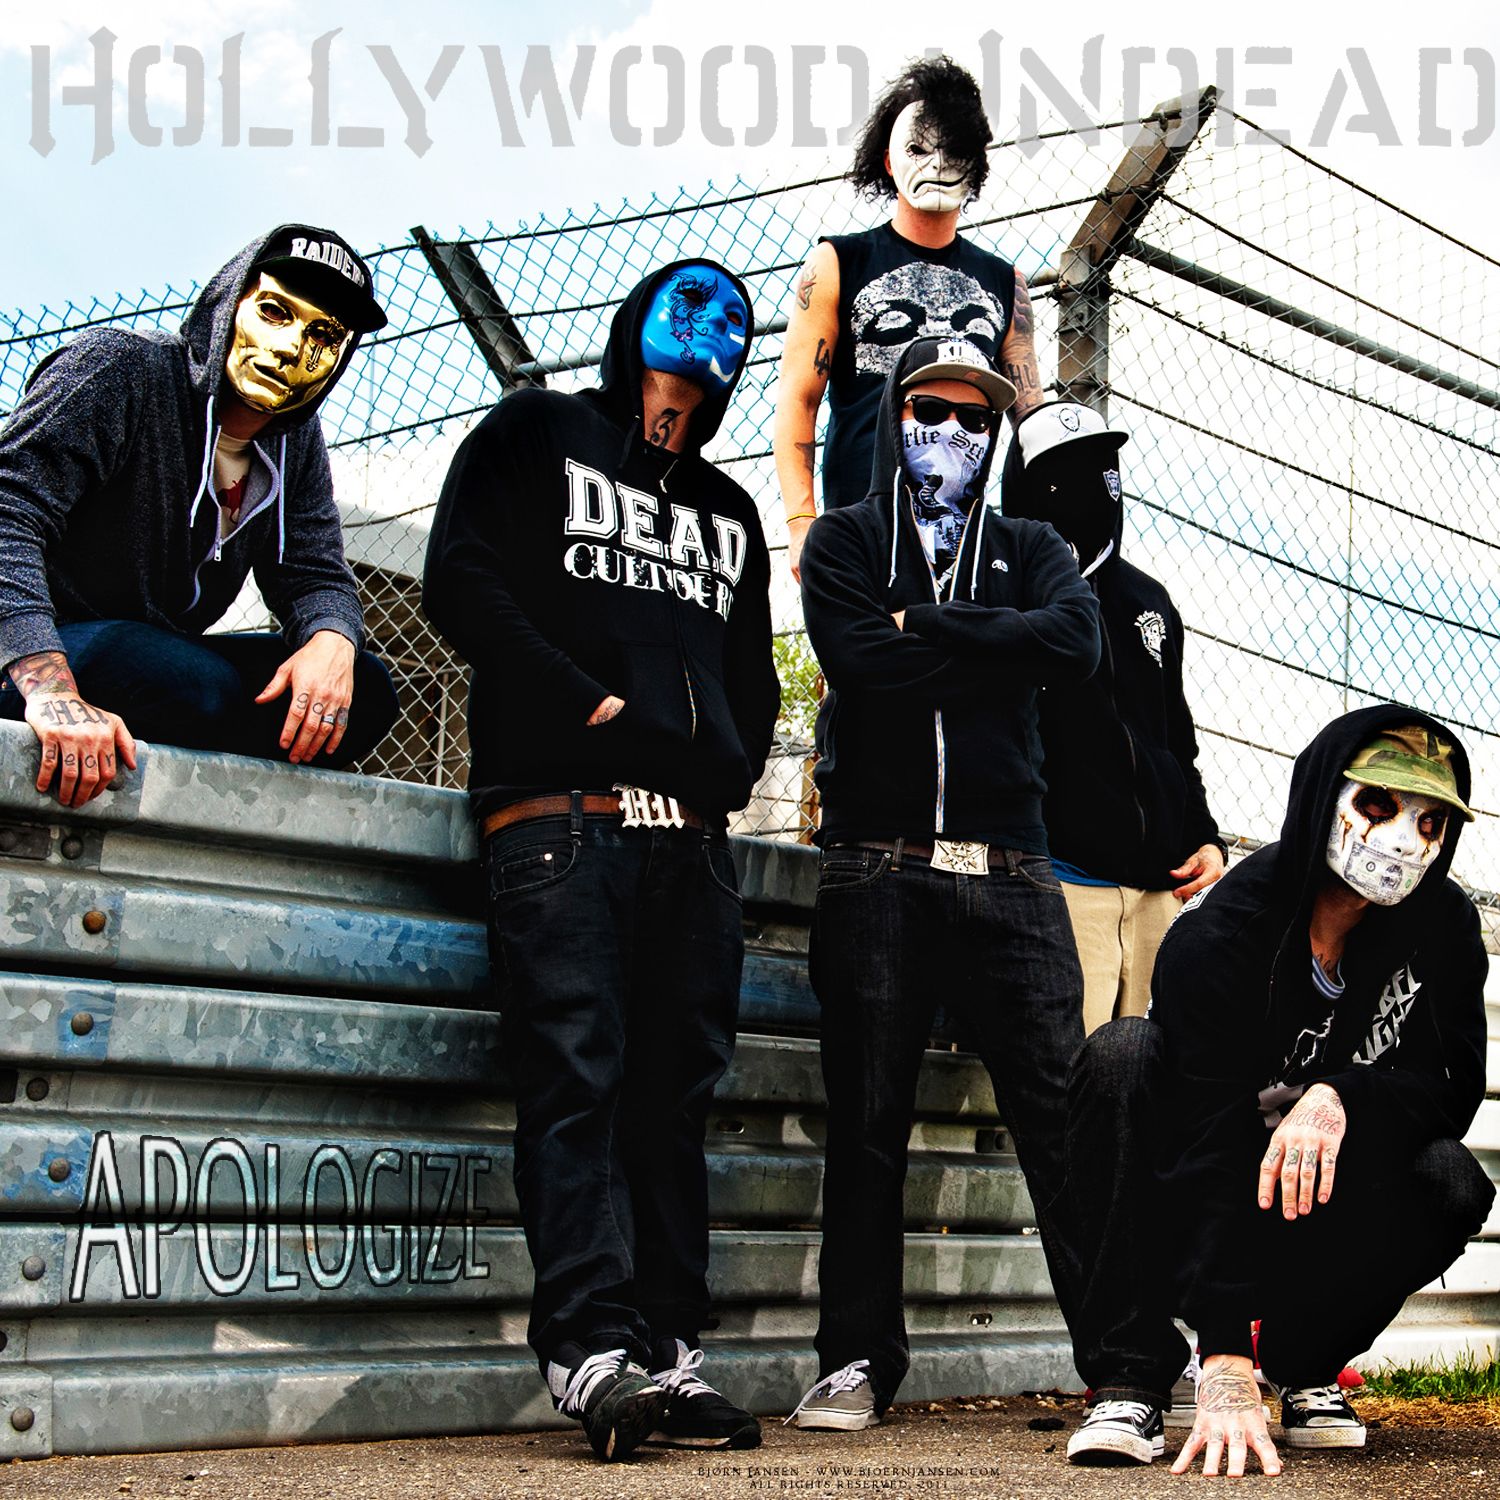 Hollywood Undead Wallpaper Hd - Hollywood Undead Hd , HD Wallpaper & Backgrounds